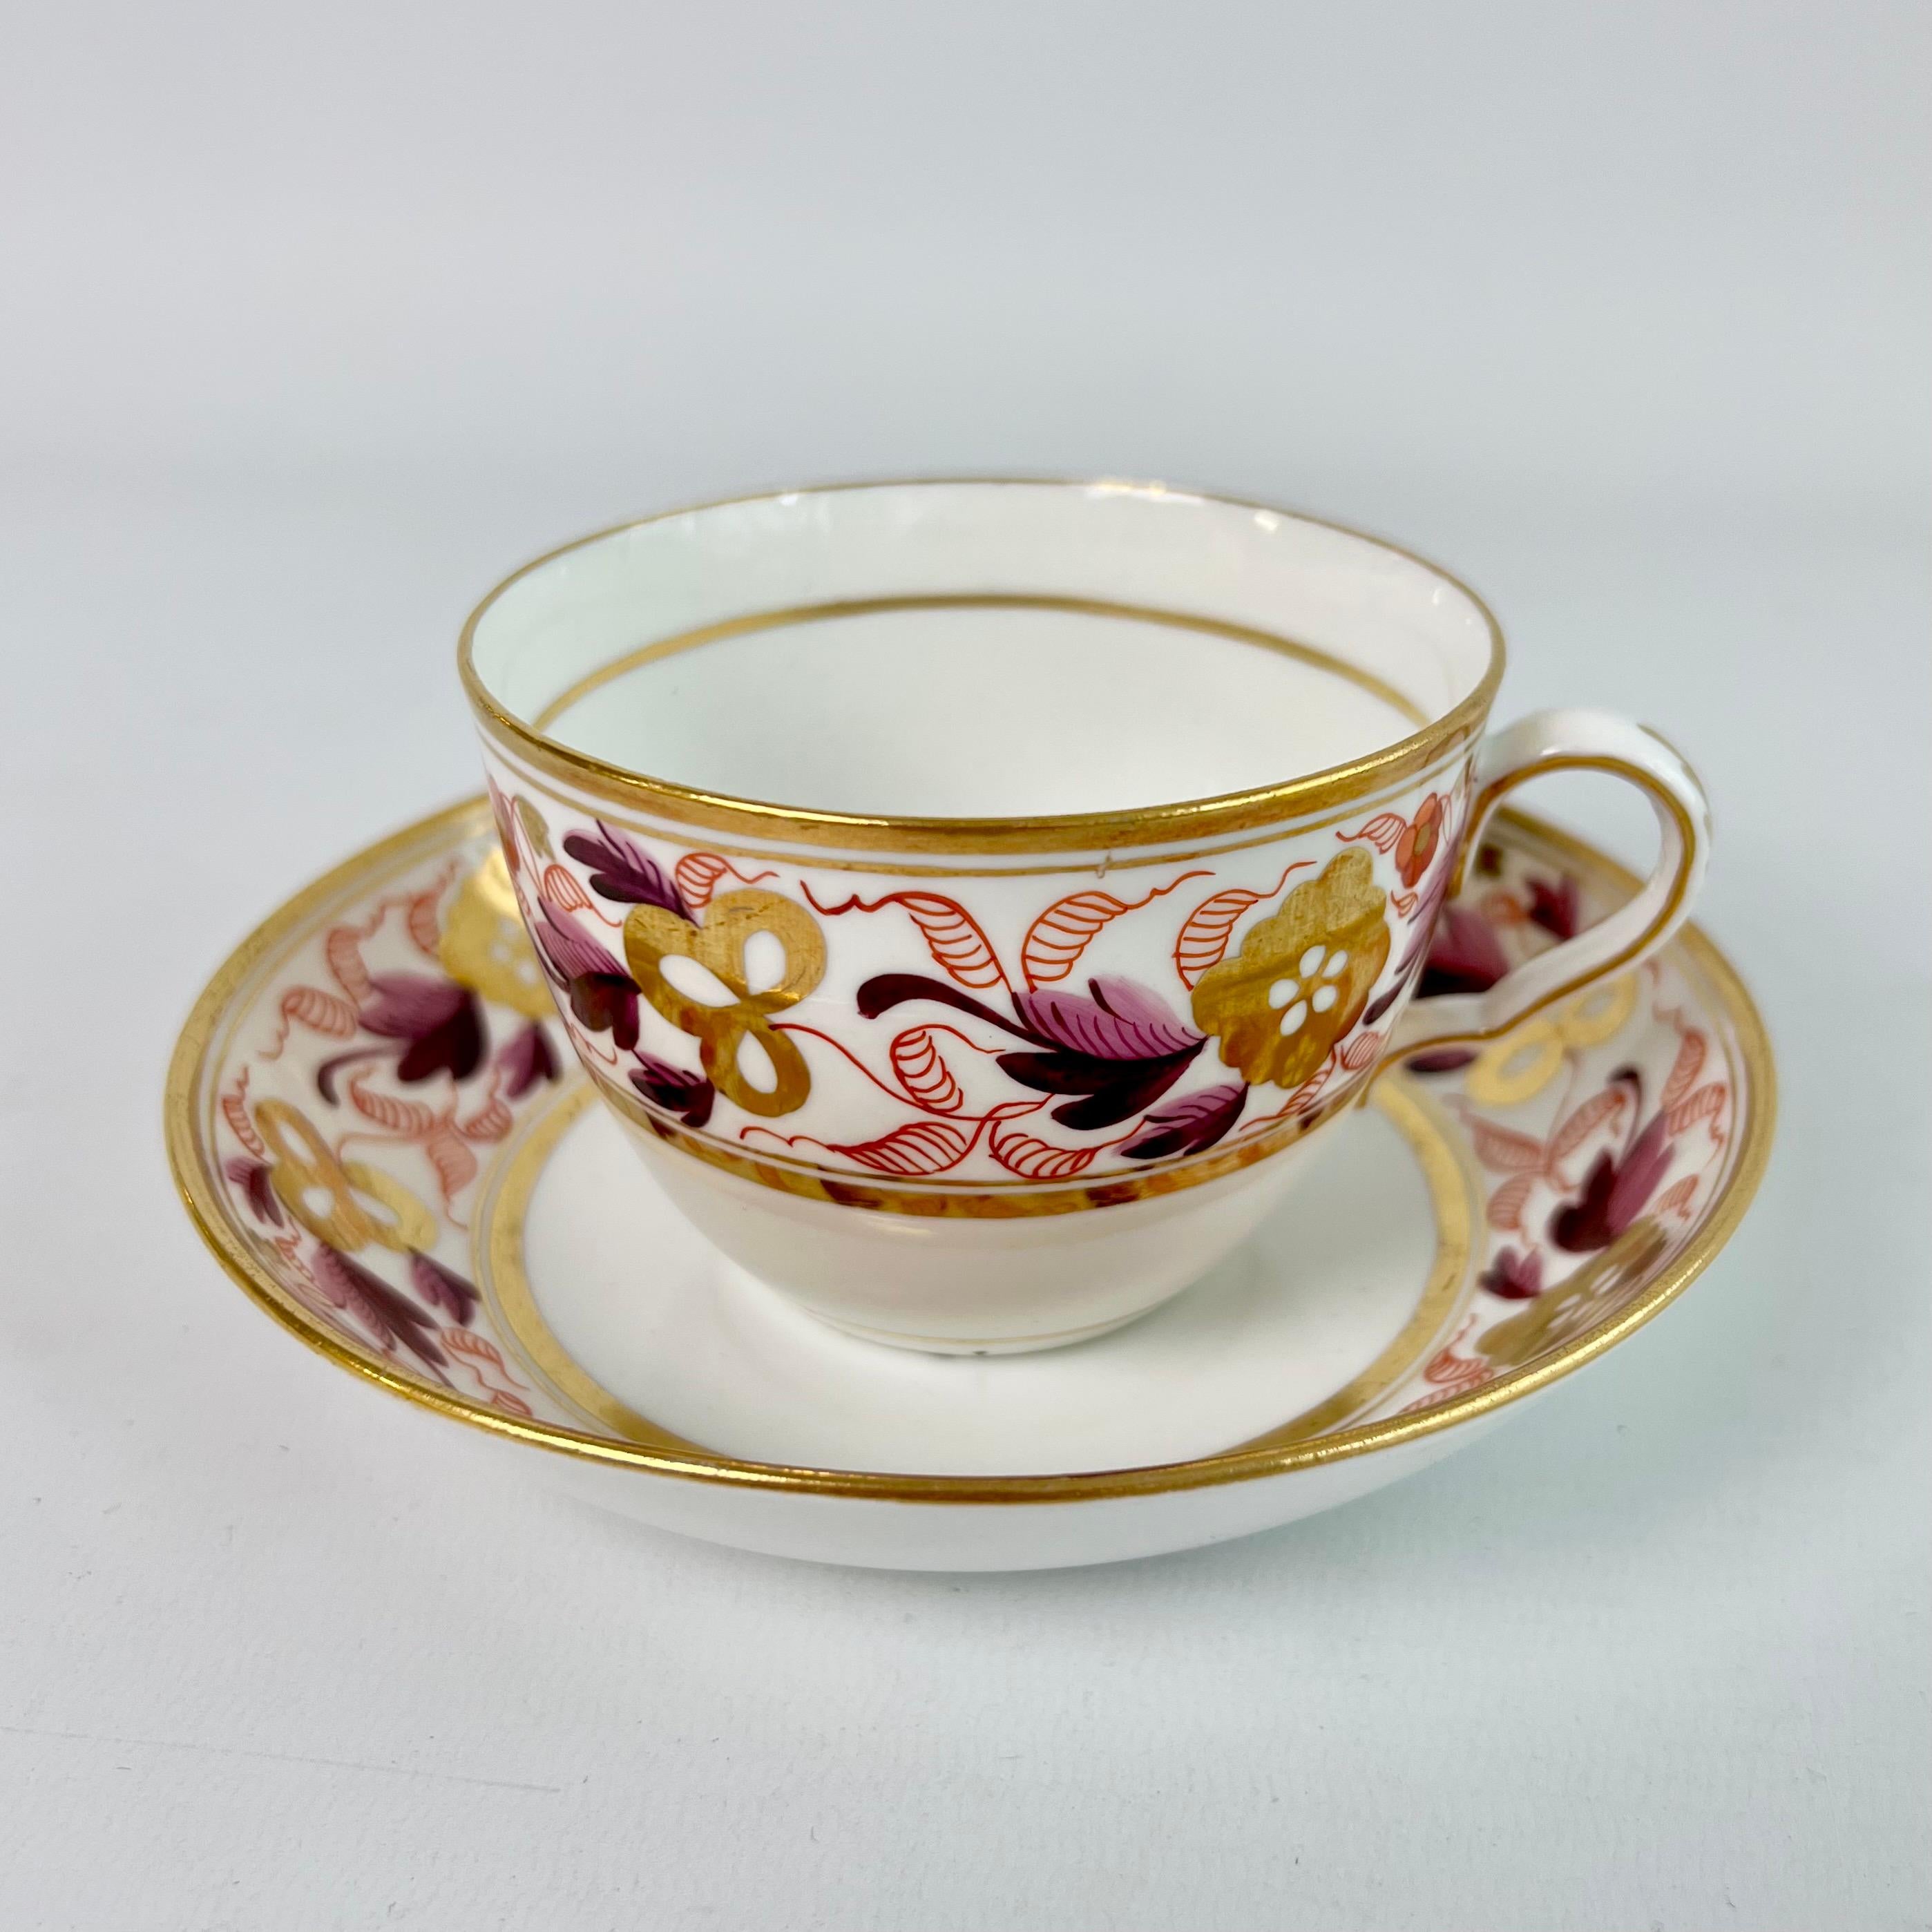 This is a beautiful true trio made by Spode around 1810. The set is decorated with pattern 889, which consists of a beautiful puce and gilt floral band. In the early 19th Century, cups and saucers were sold as 